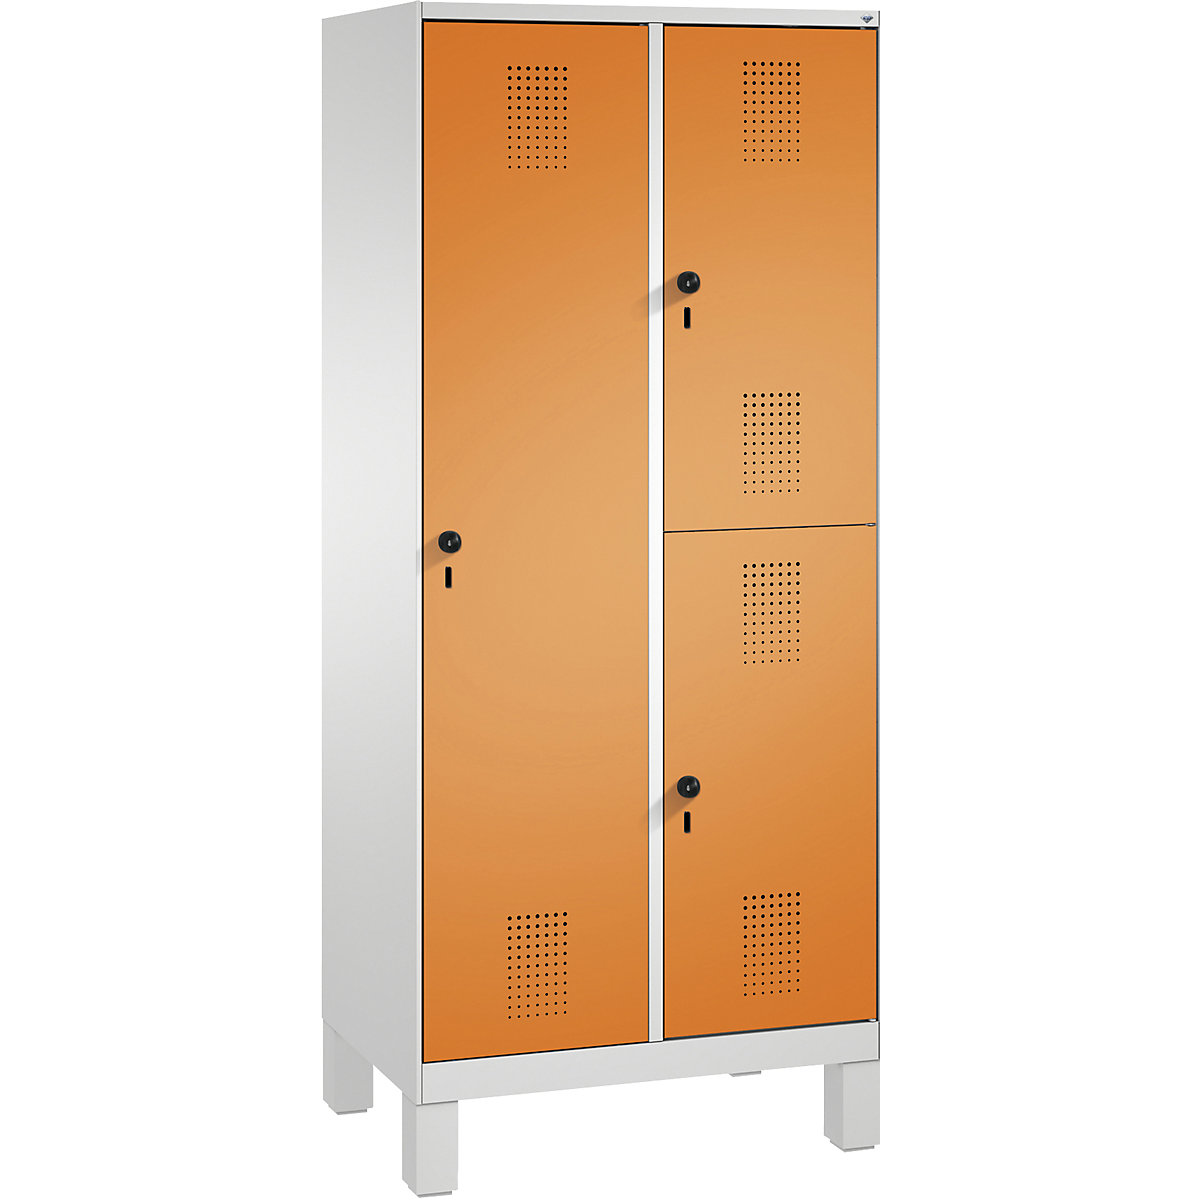 EVOLO combination cupboard, single and double tier – C+P, 2 compartments, 3 doors, compartment width 400 mm, with feet, light grey / yellow orange